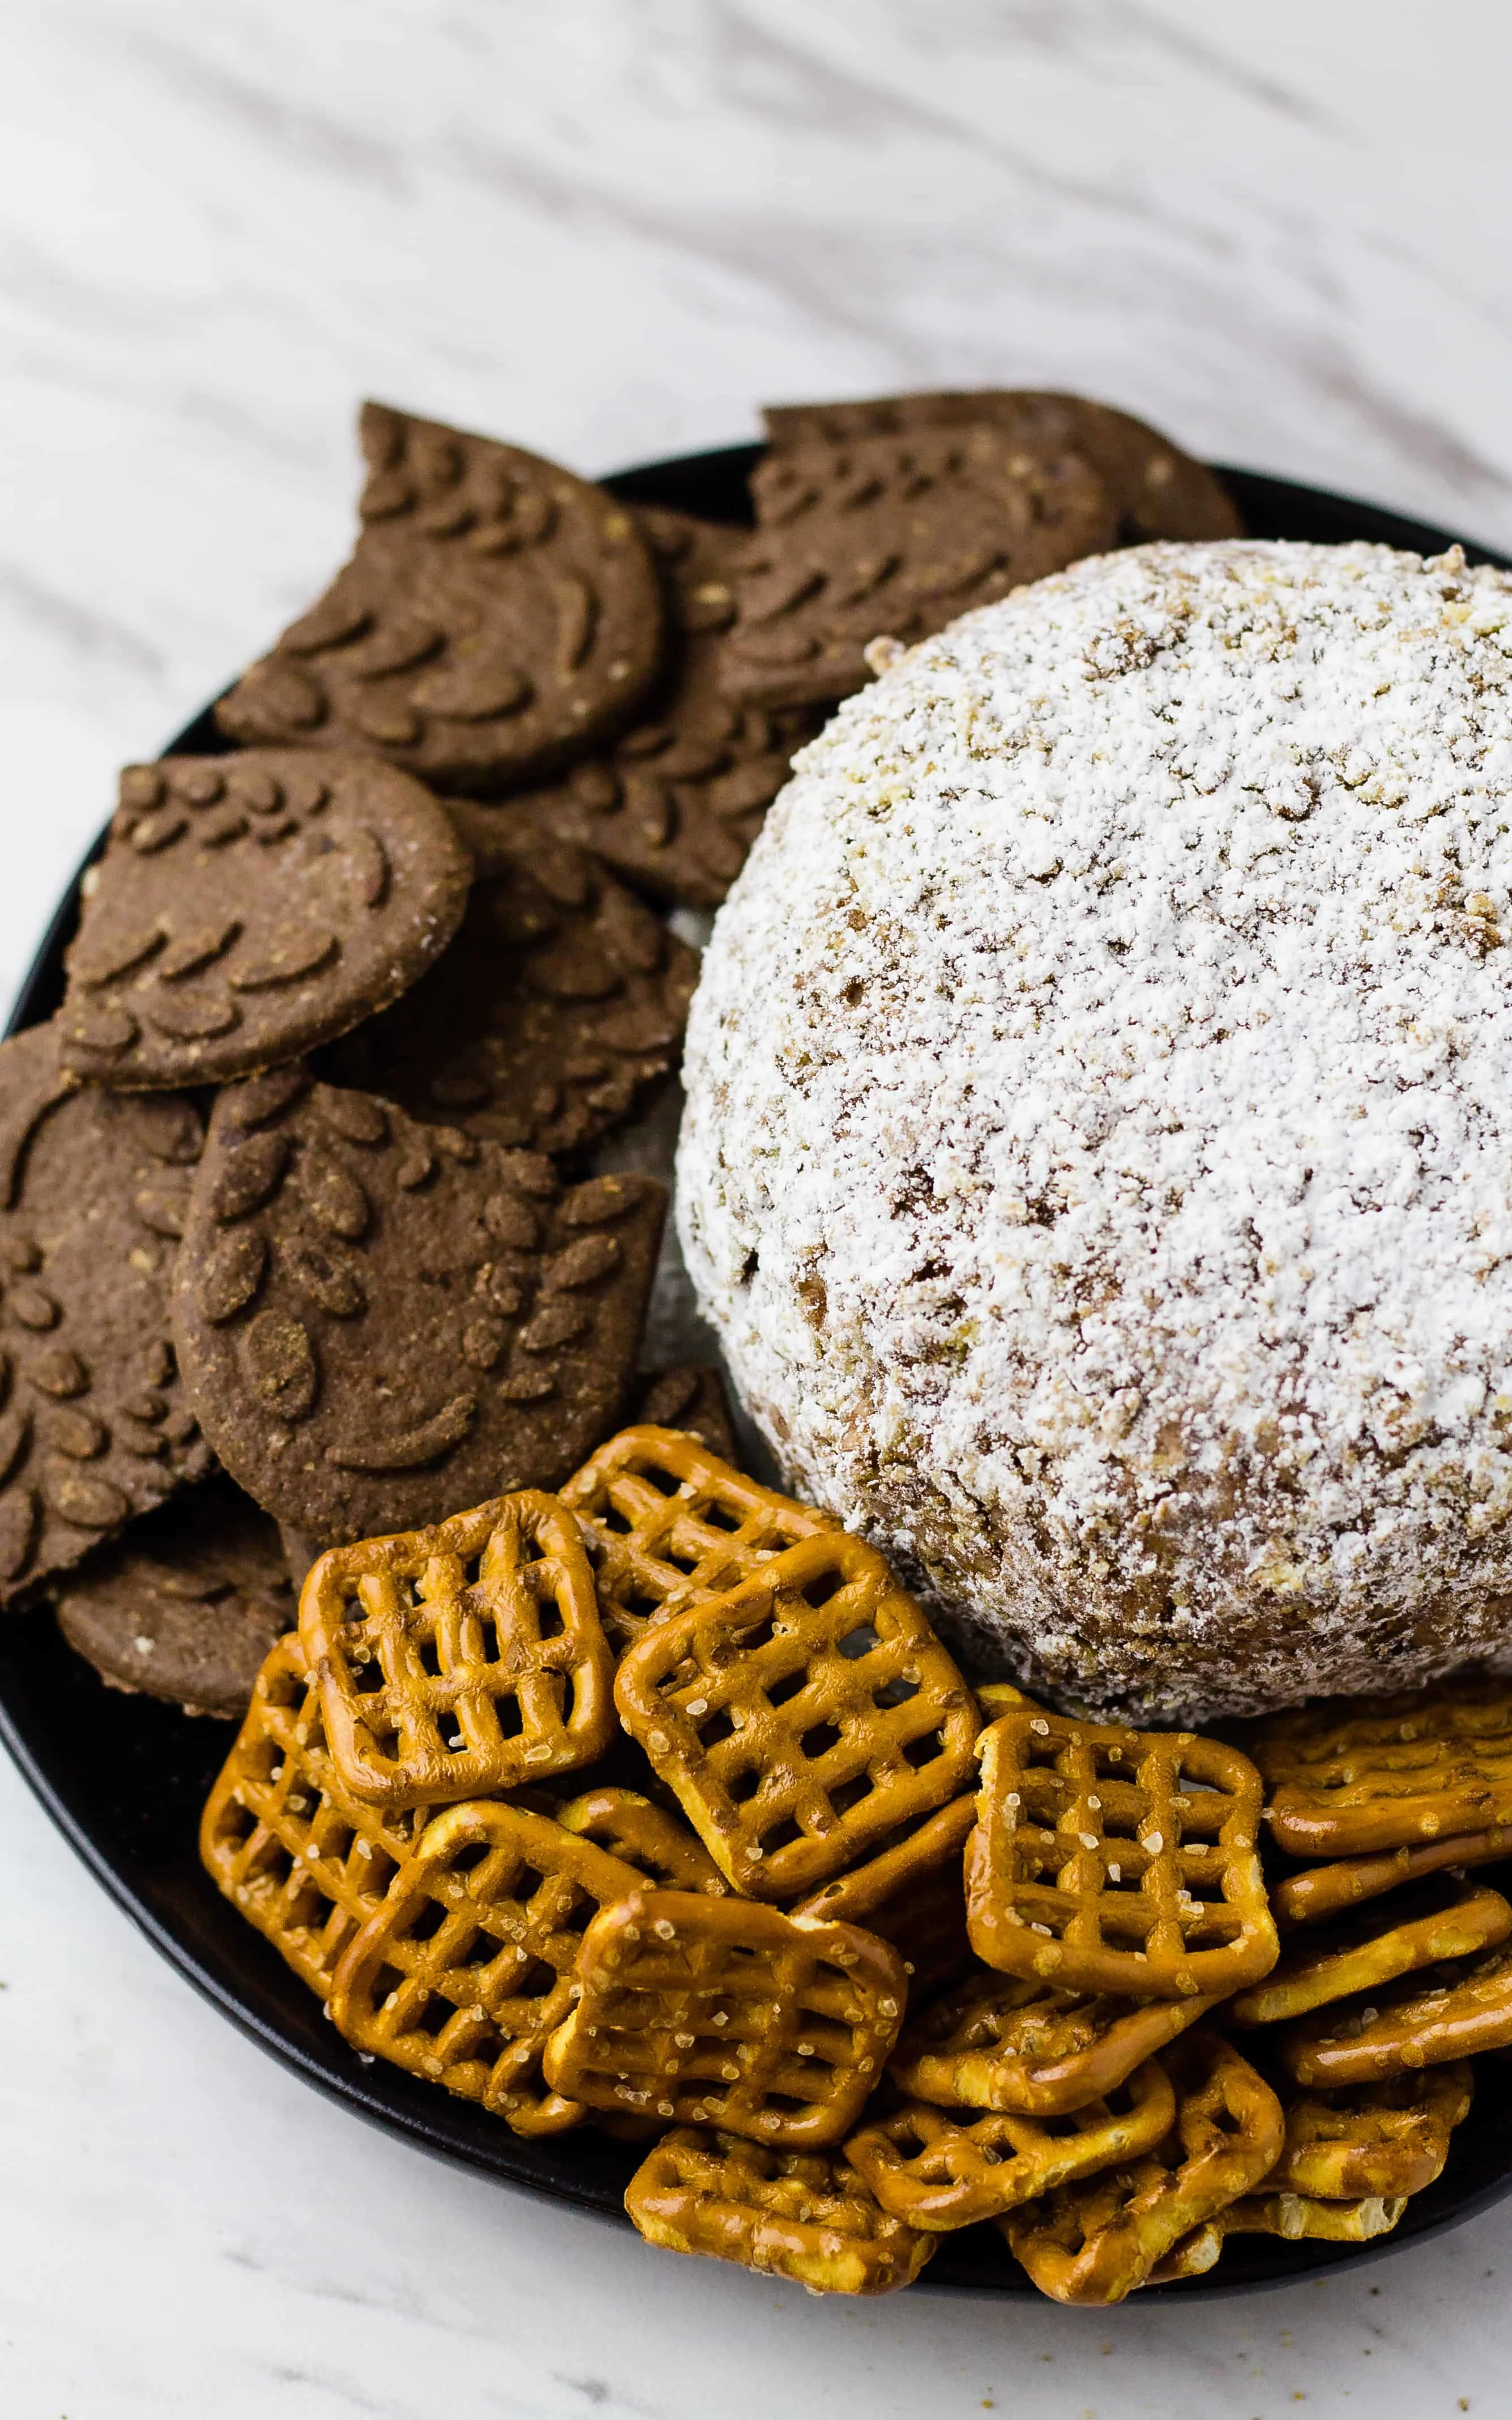 Chocolate, Peanut Butter, and Crispy Chex Cereal makes a great Puppy Chow Cheese Ball | Take Two Tapas | #PuppyChow #MuddyBuddies #ChexMix #SnackMix #CheeseBallRecipe #SweetCheeseBall #PuppyChowRecipe #MuddyBuddyRecipe